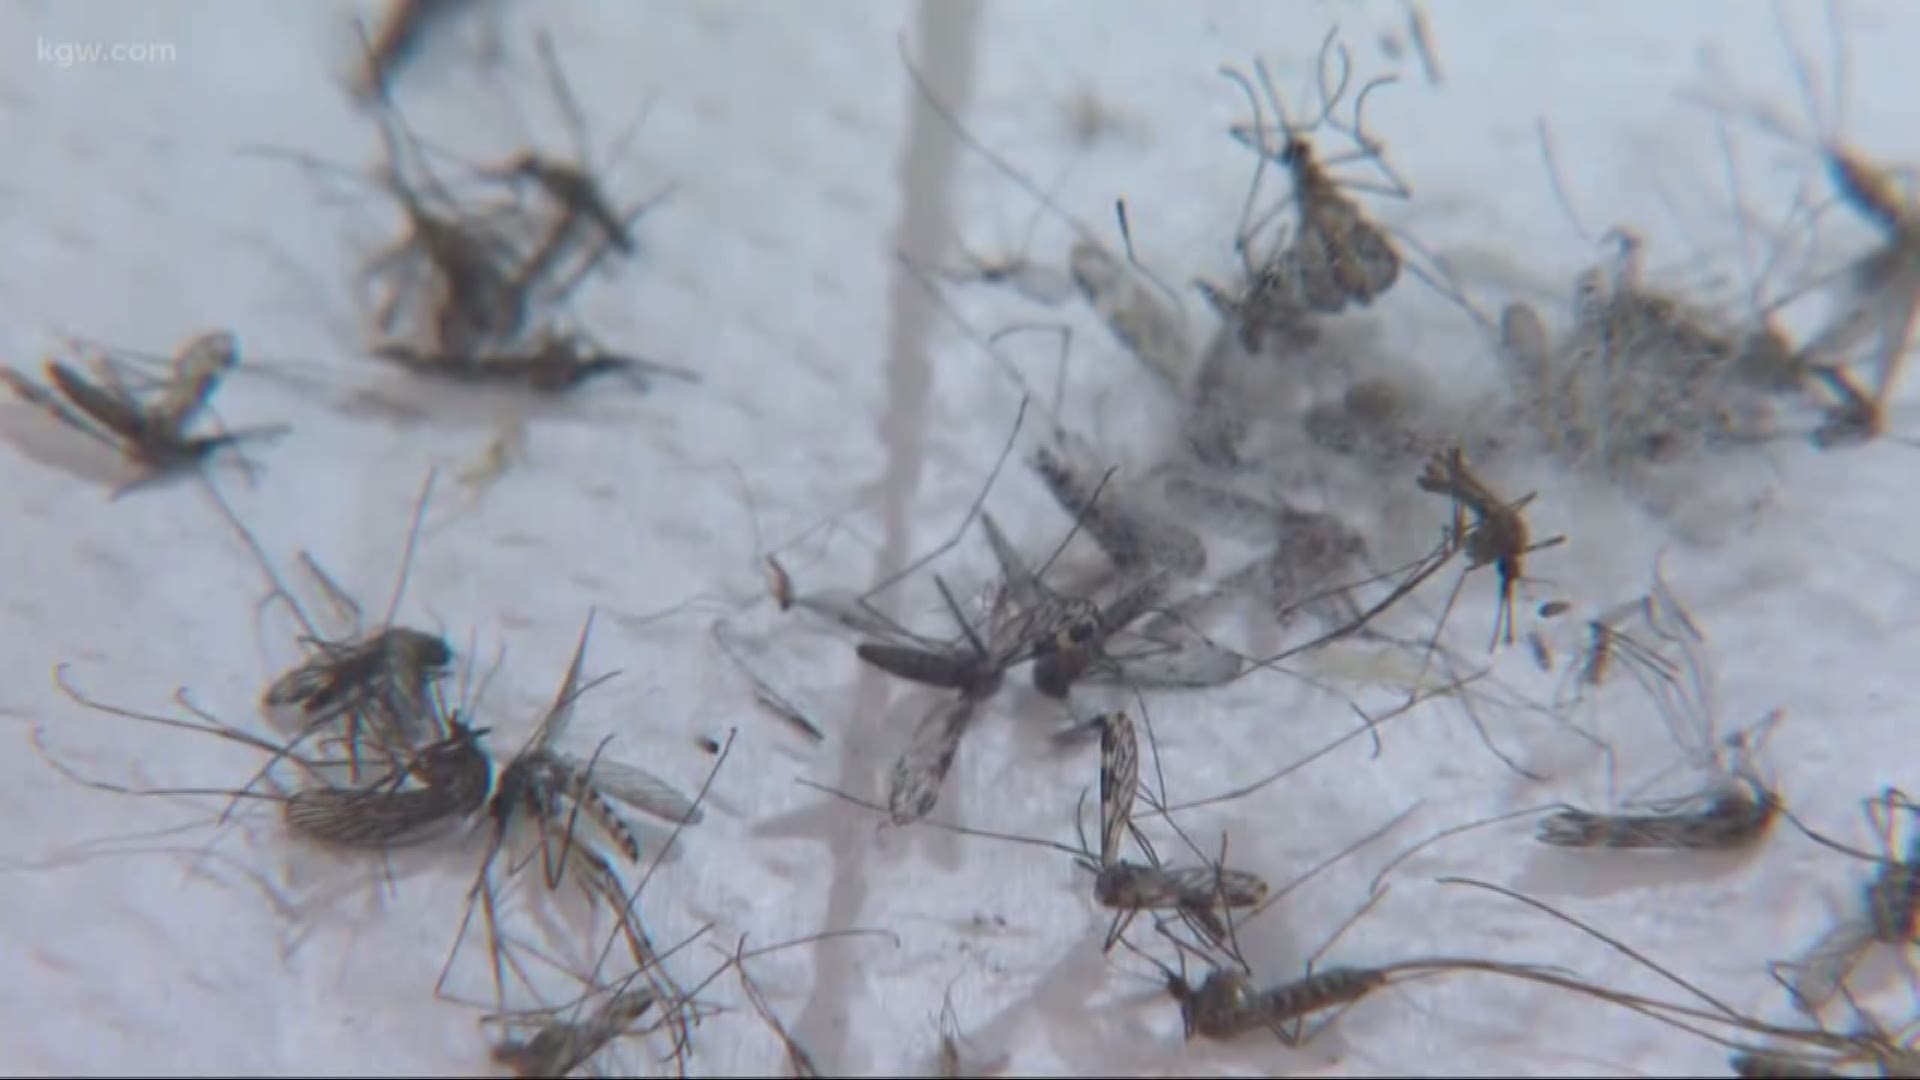 It's looking like a nasty mosquito season is on the way.